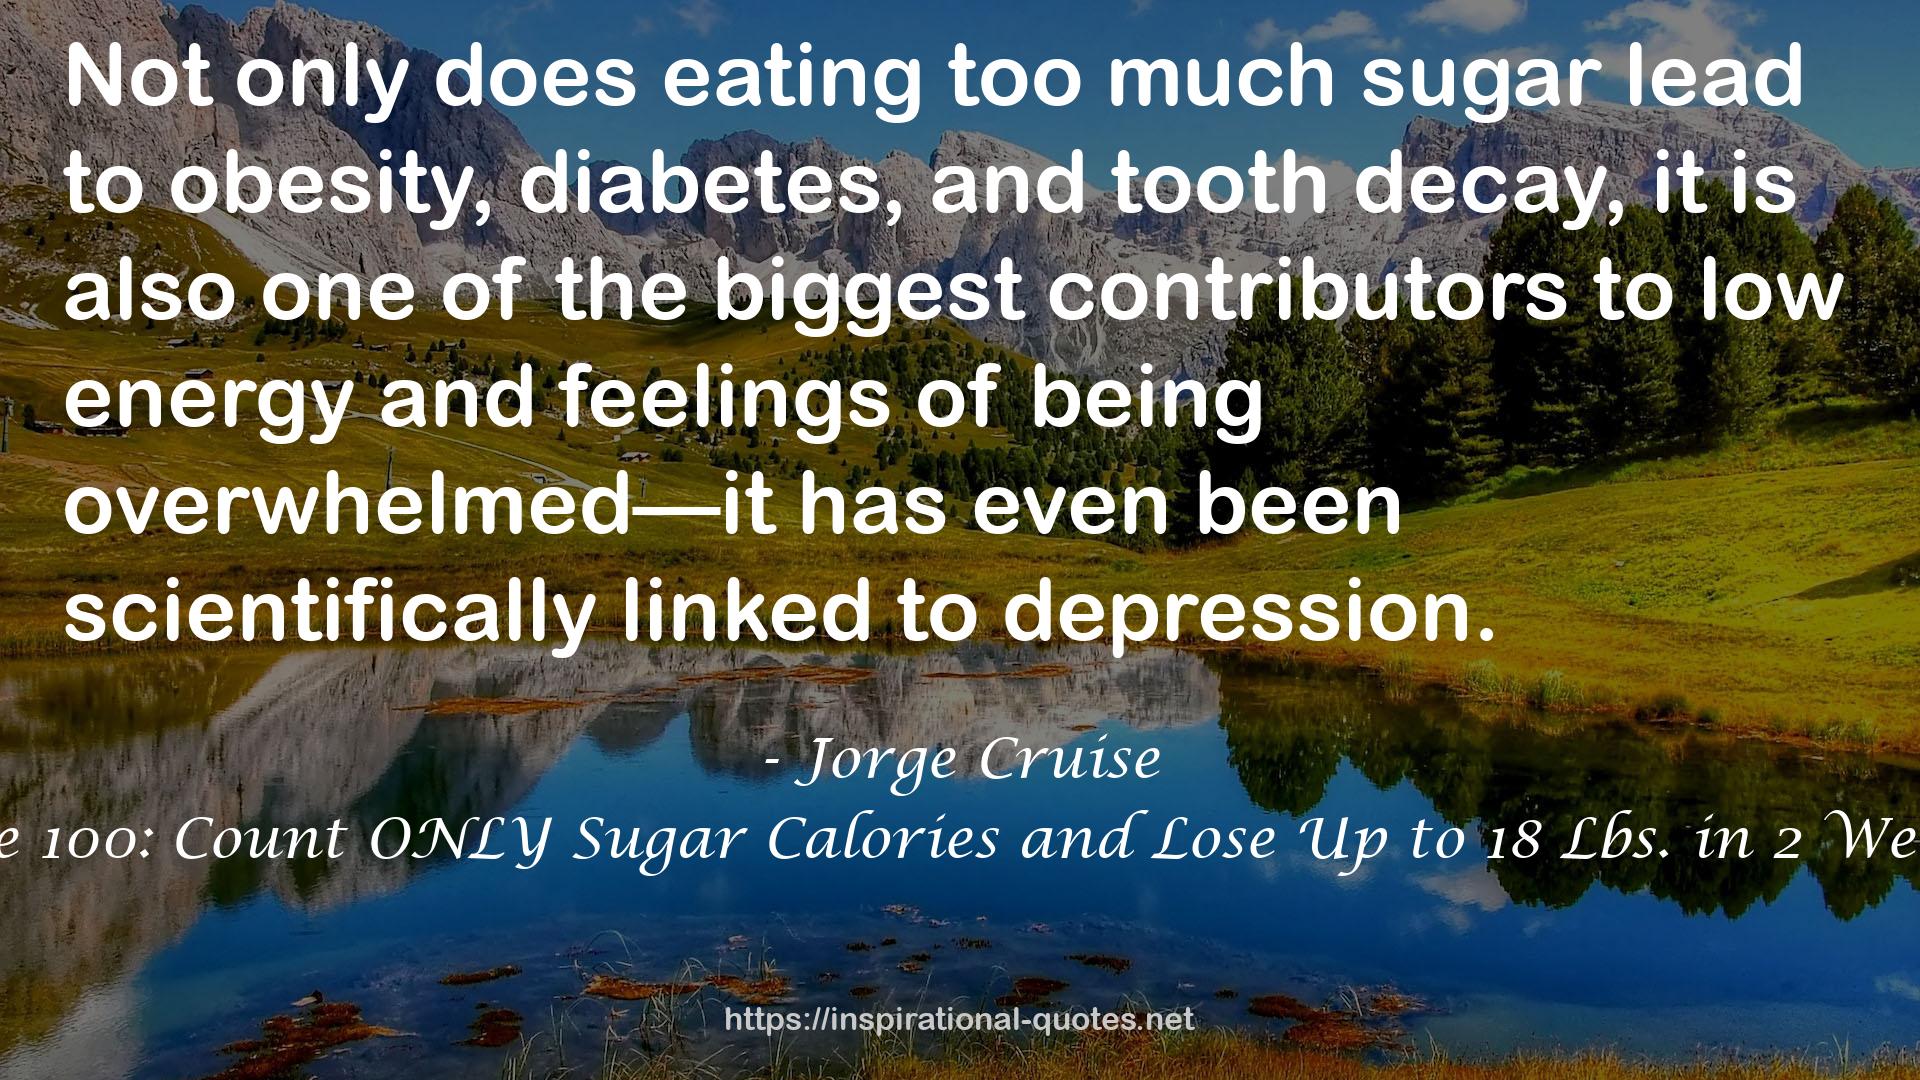 The 100: Count ONLY Sugar Calories and Lose Up to 18 Lbs. in 2 Weeks QUOTES